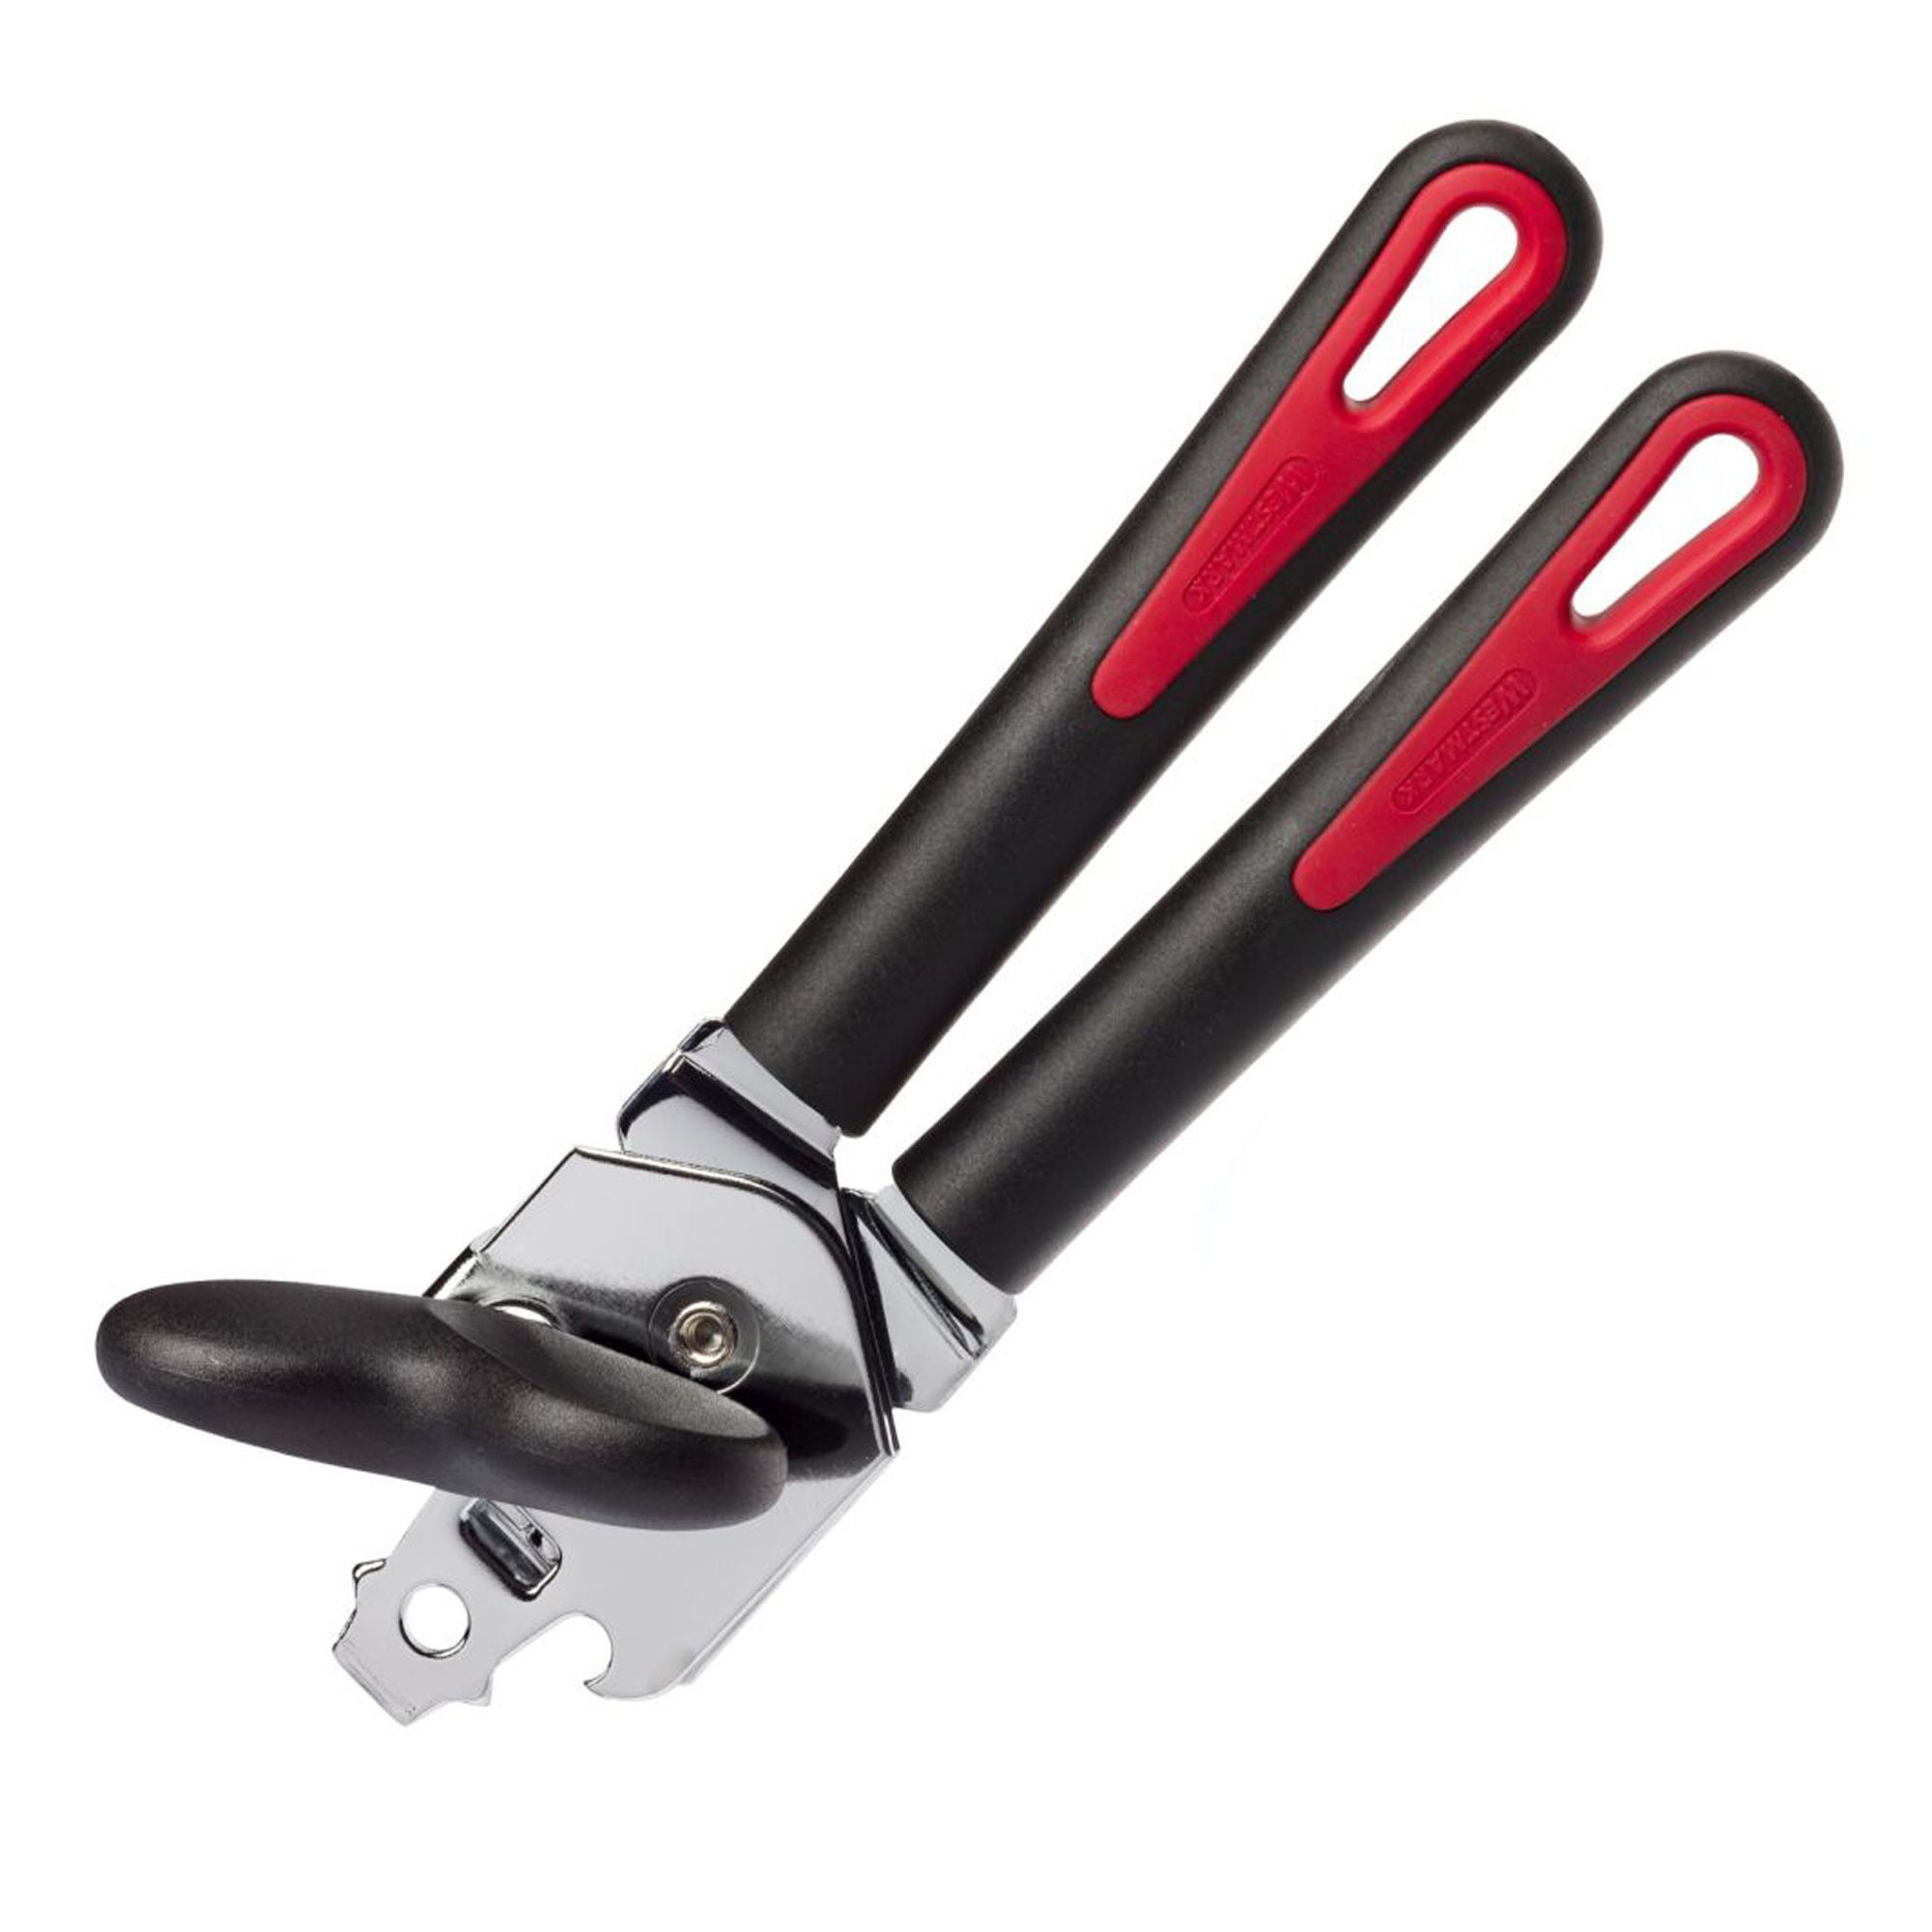 Westmark - "Gallant" pincer can opener